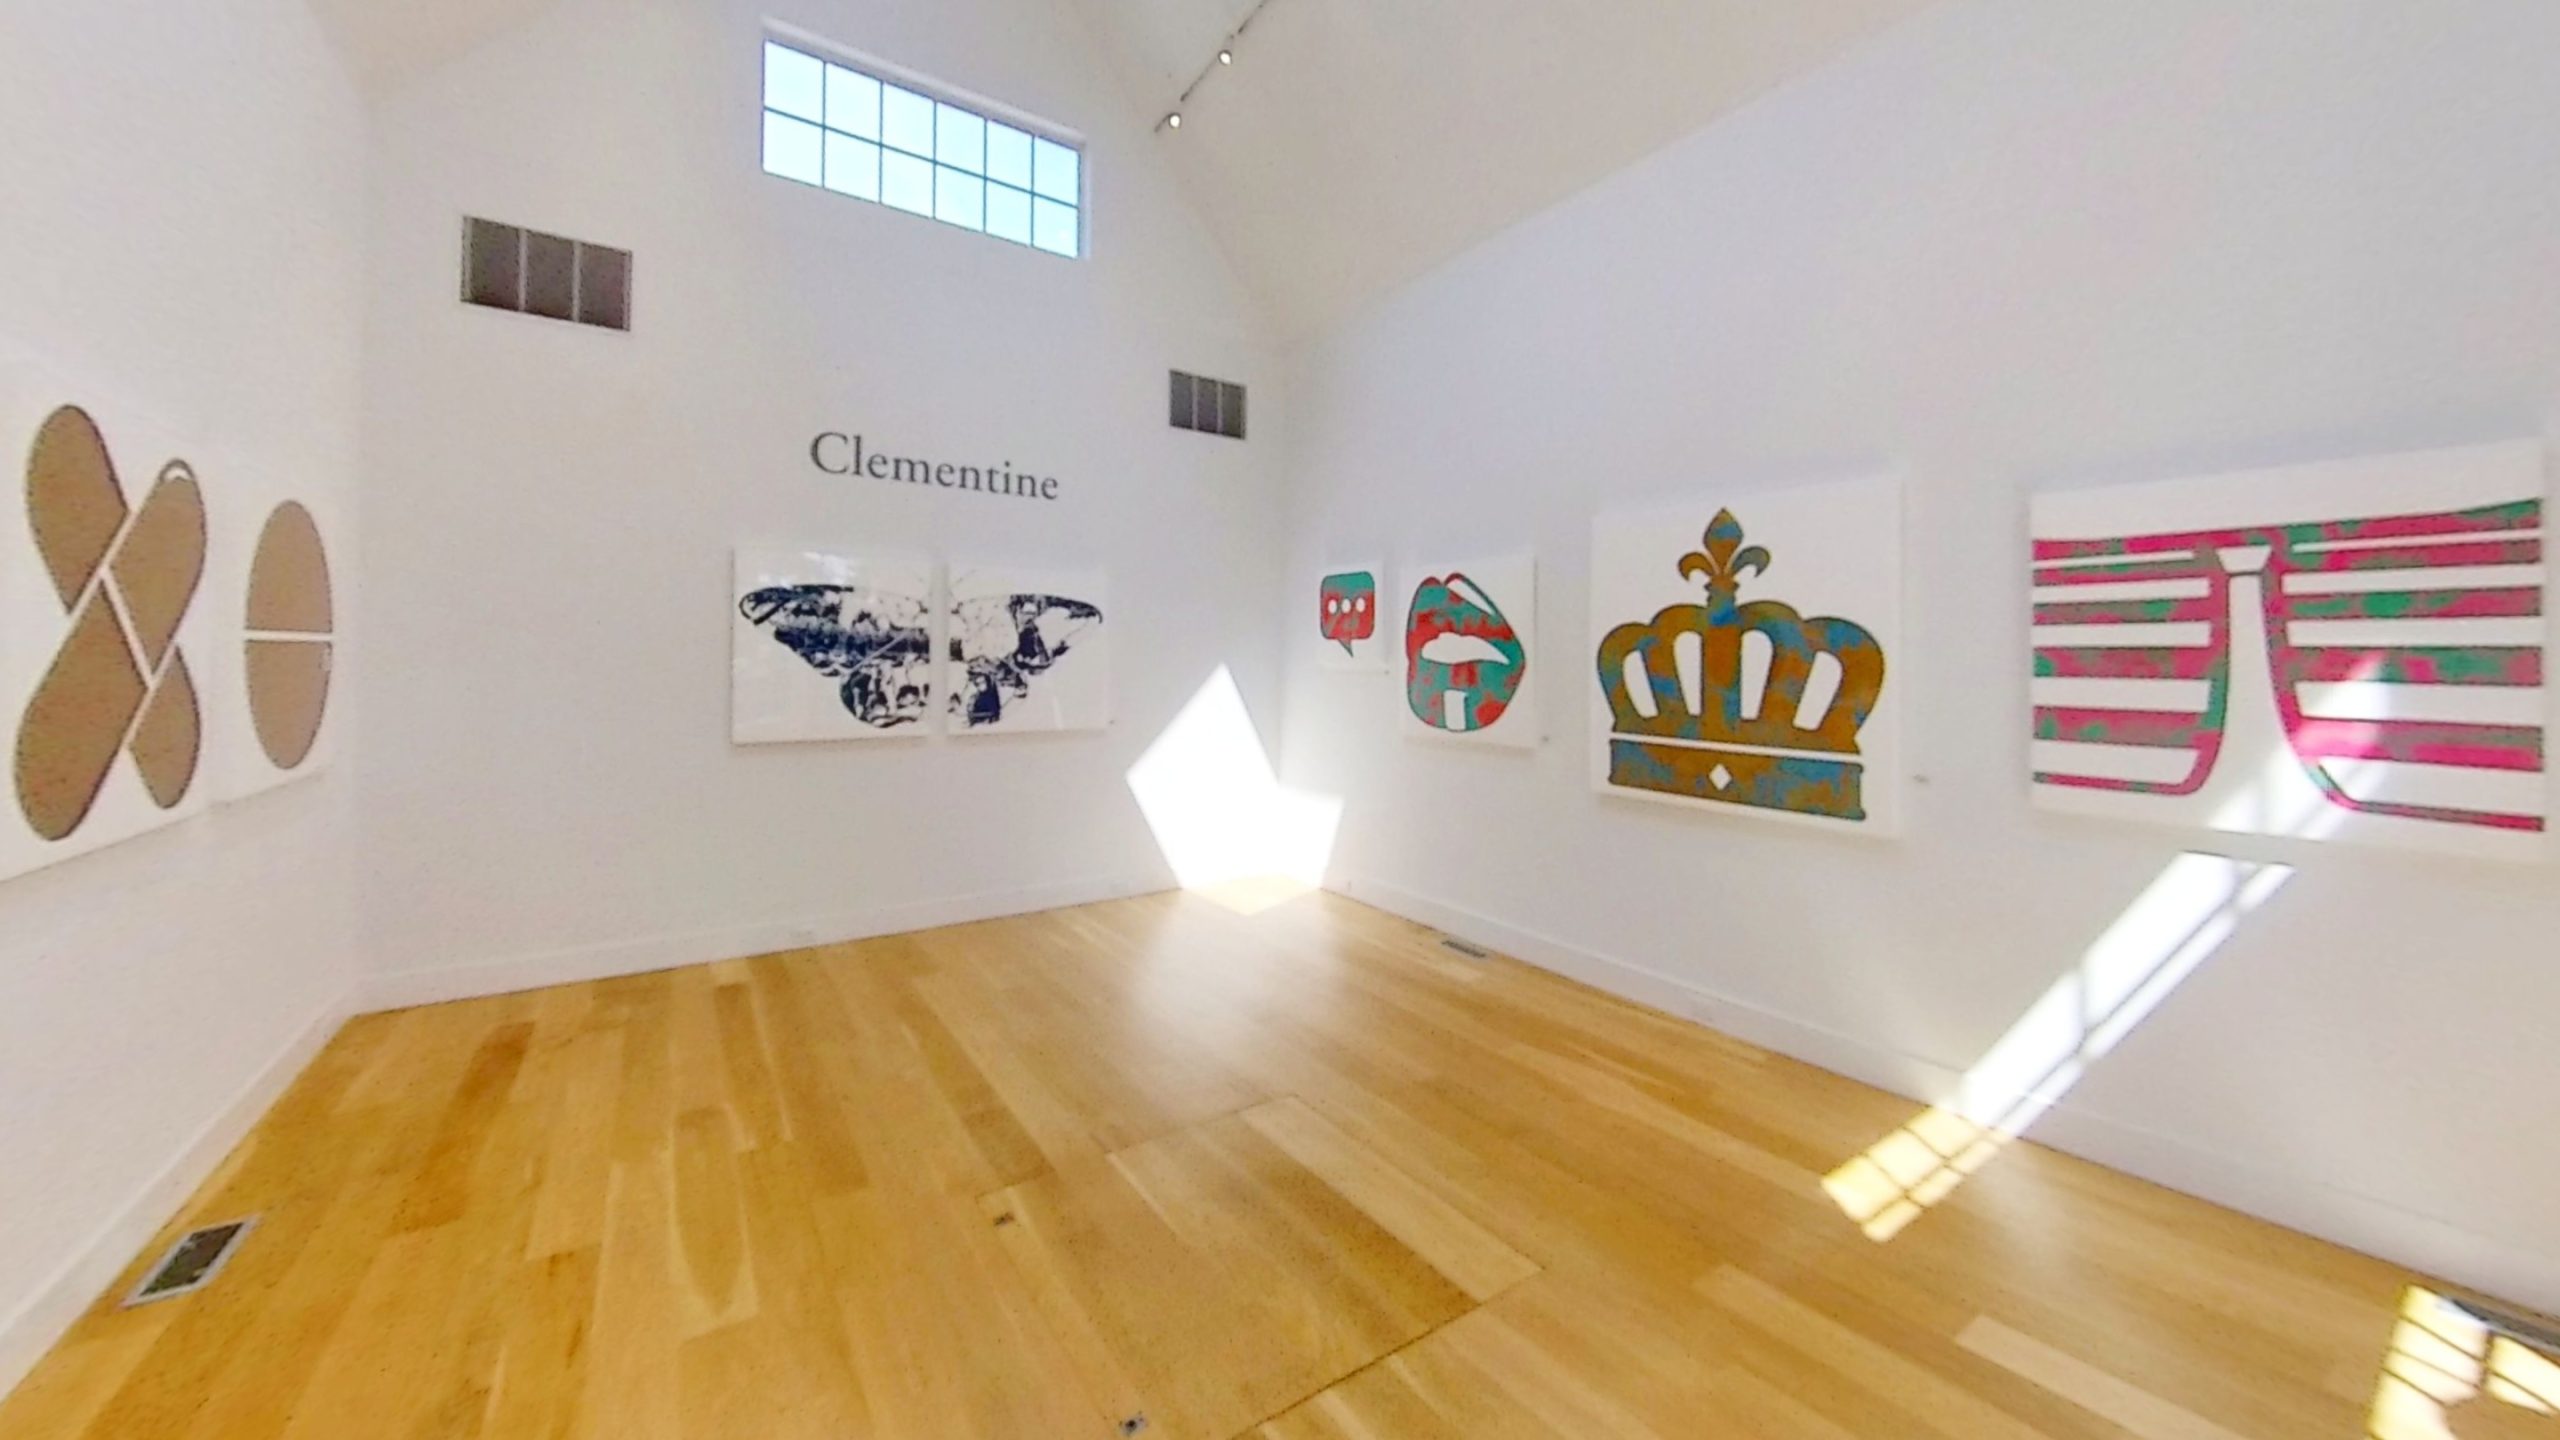 Clementine North Gallery exhibition wide angle shot